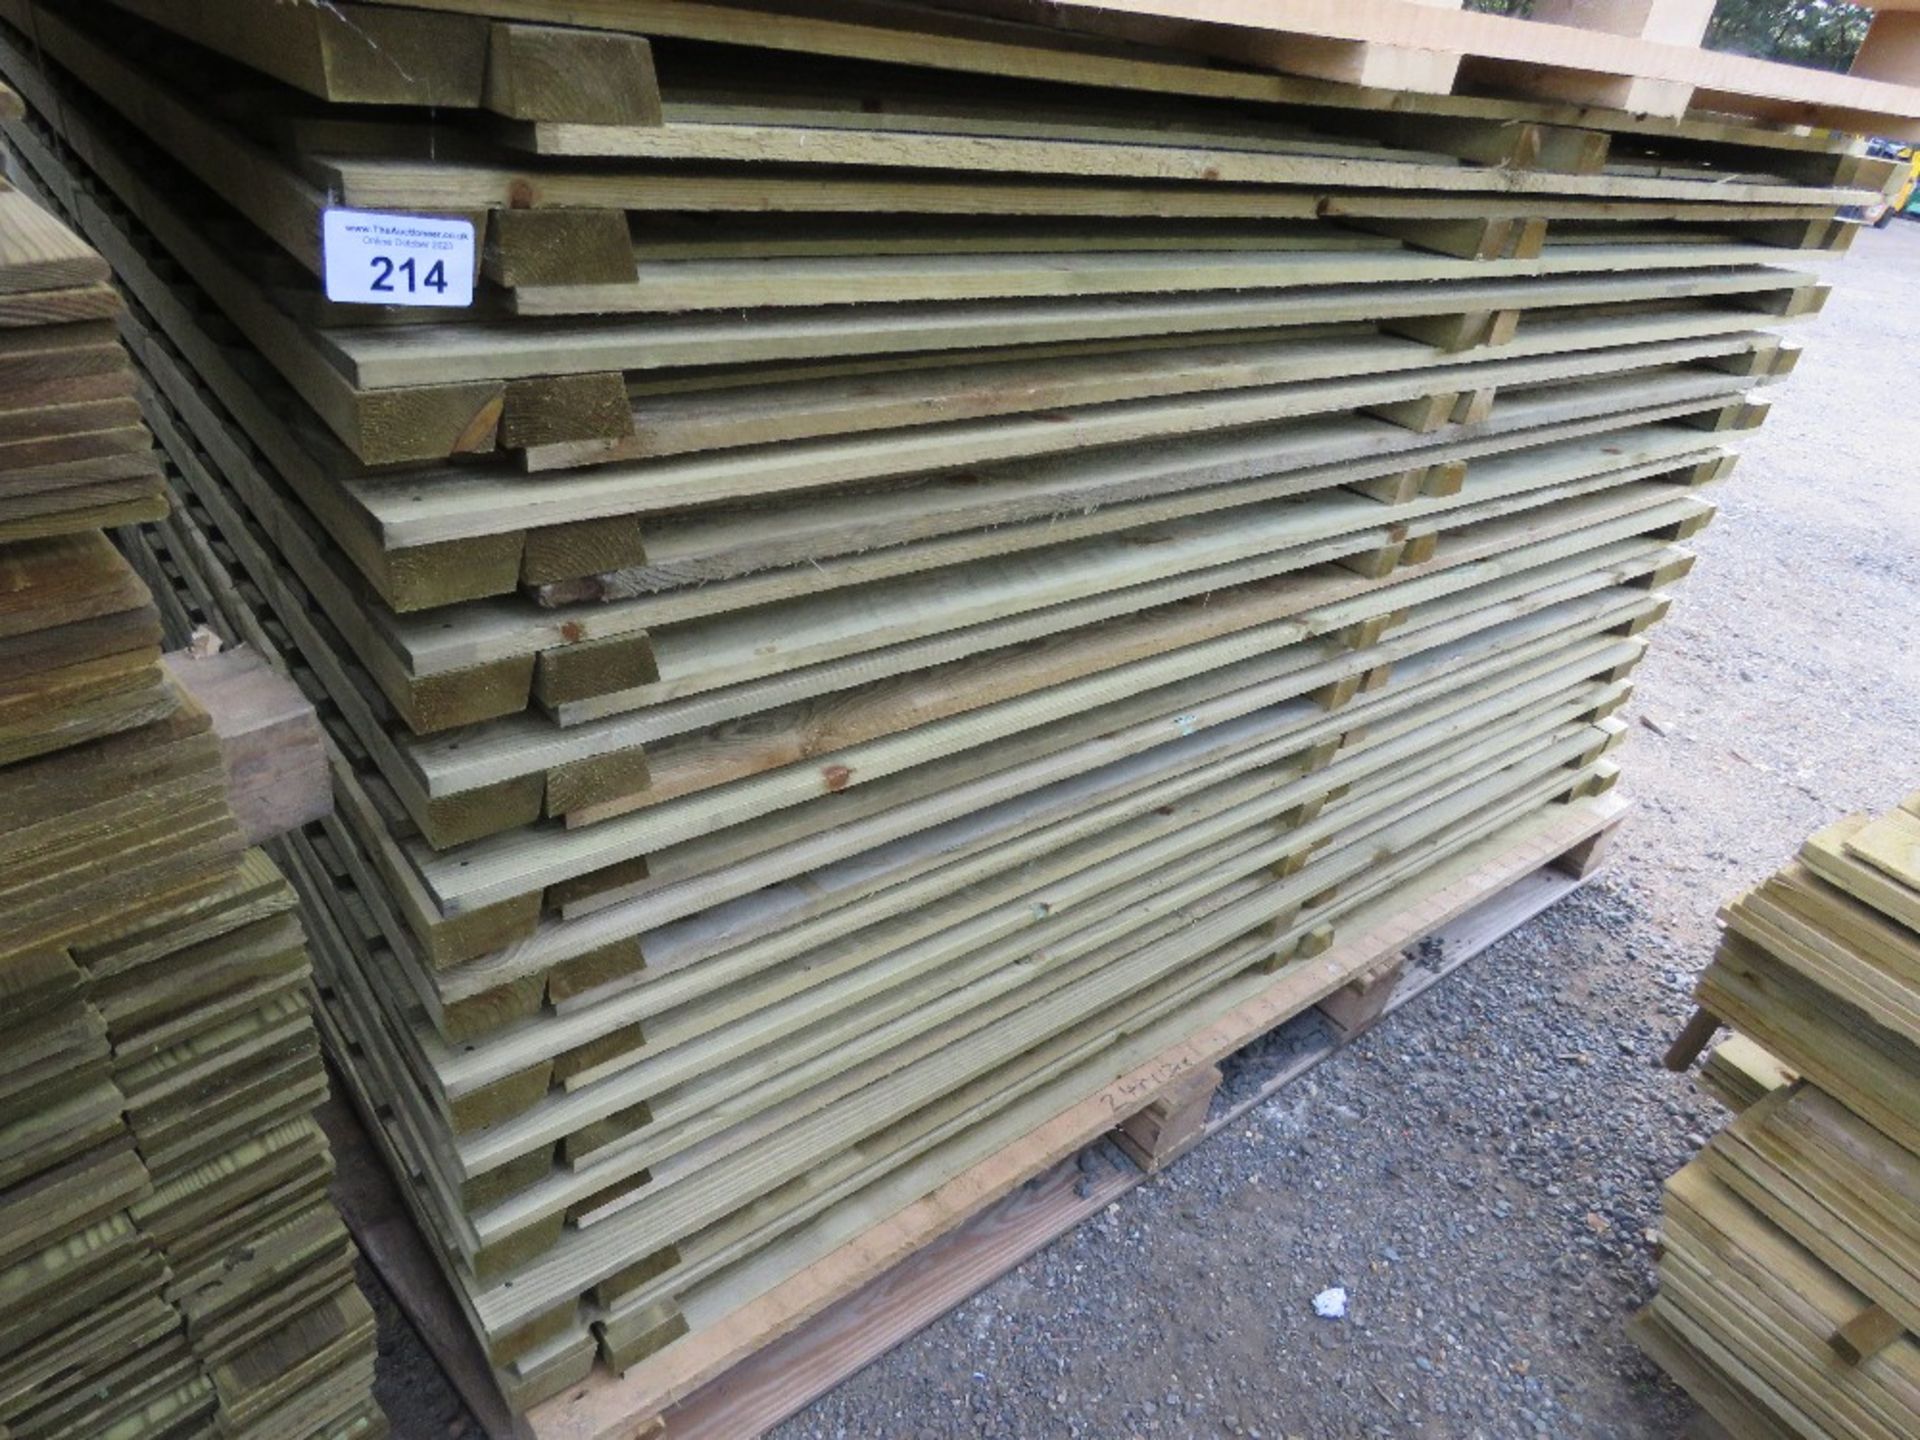 24NO FEATHER EDGE CLAD FENCING PANELS, PRESSURE TREATED, 1.8M X 1.83M APPROX. - Image 3 of 4